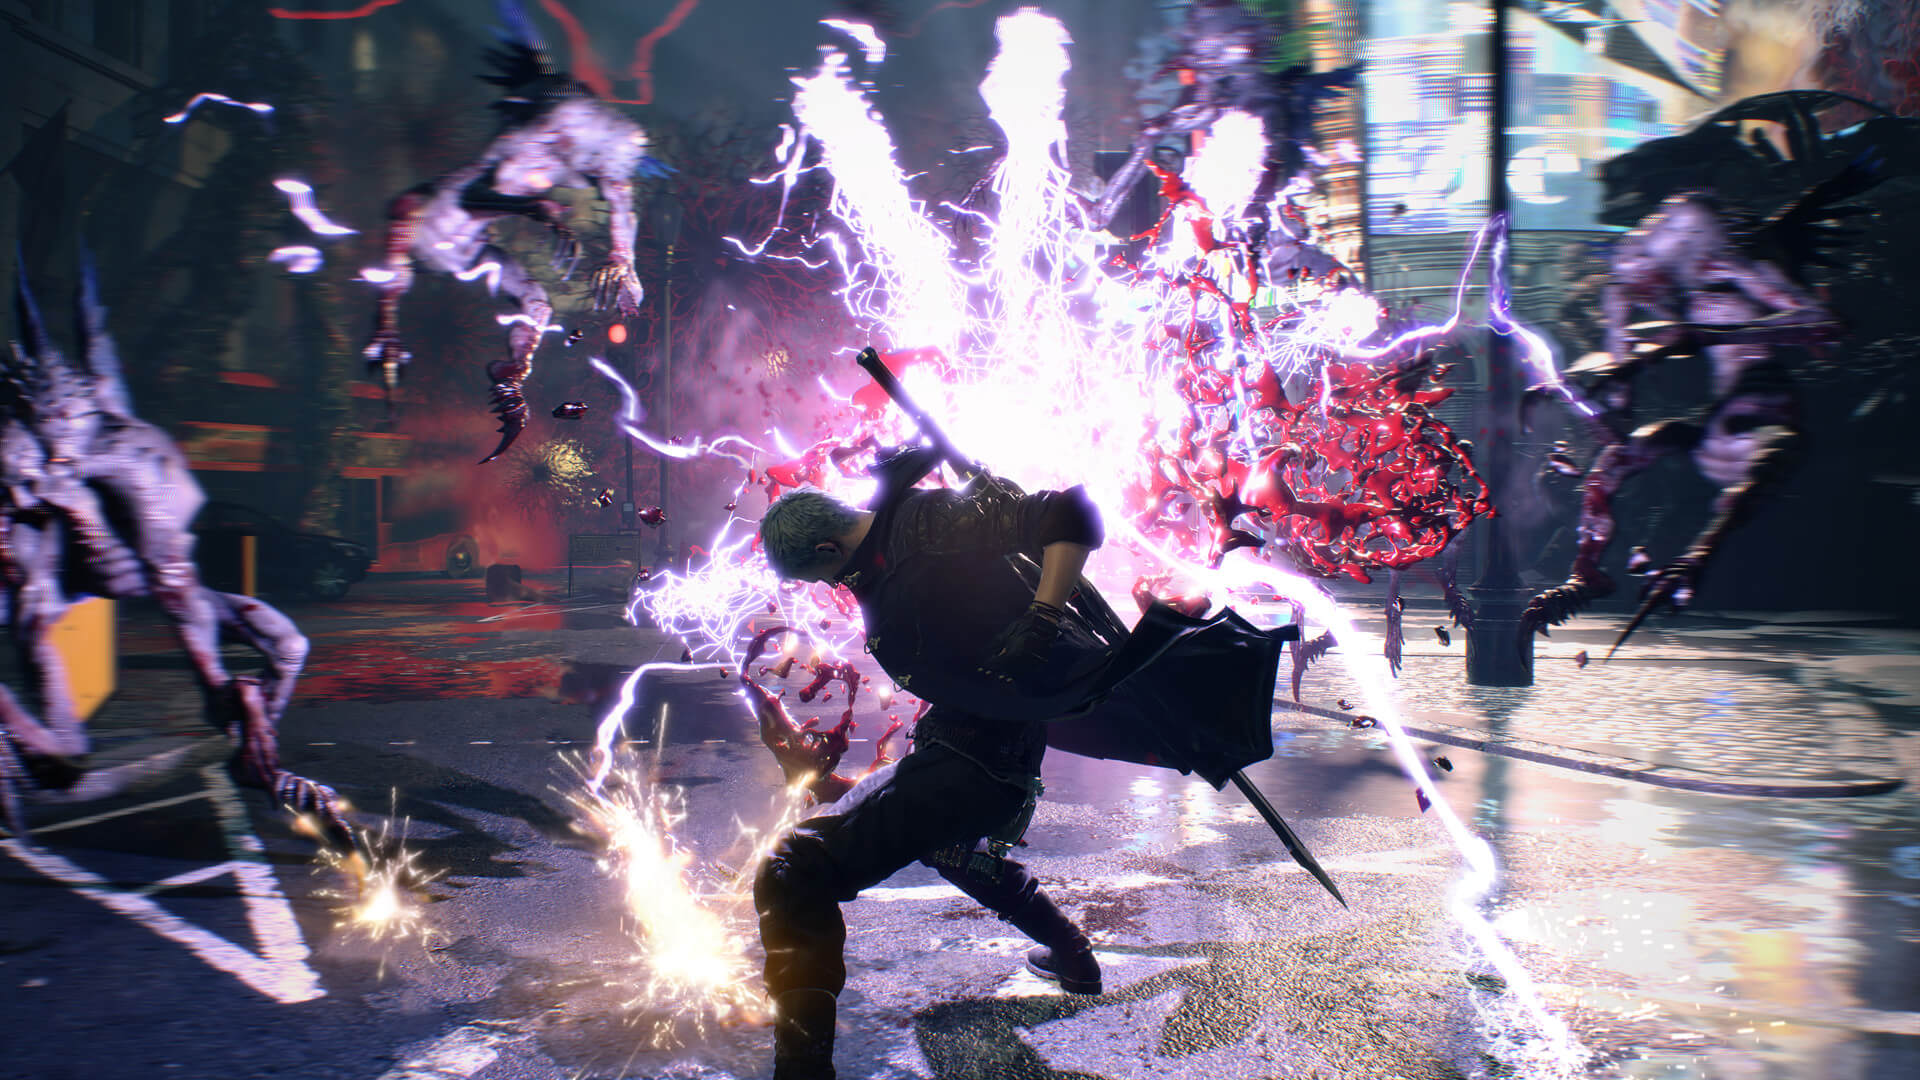 Devil may cry 5 oyun inceleme